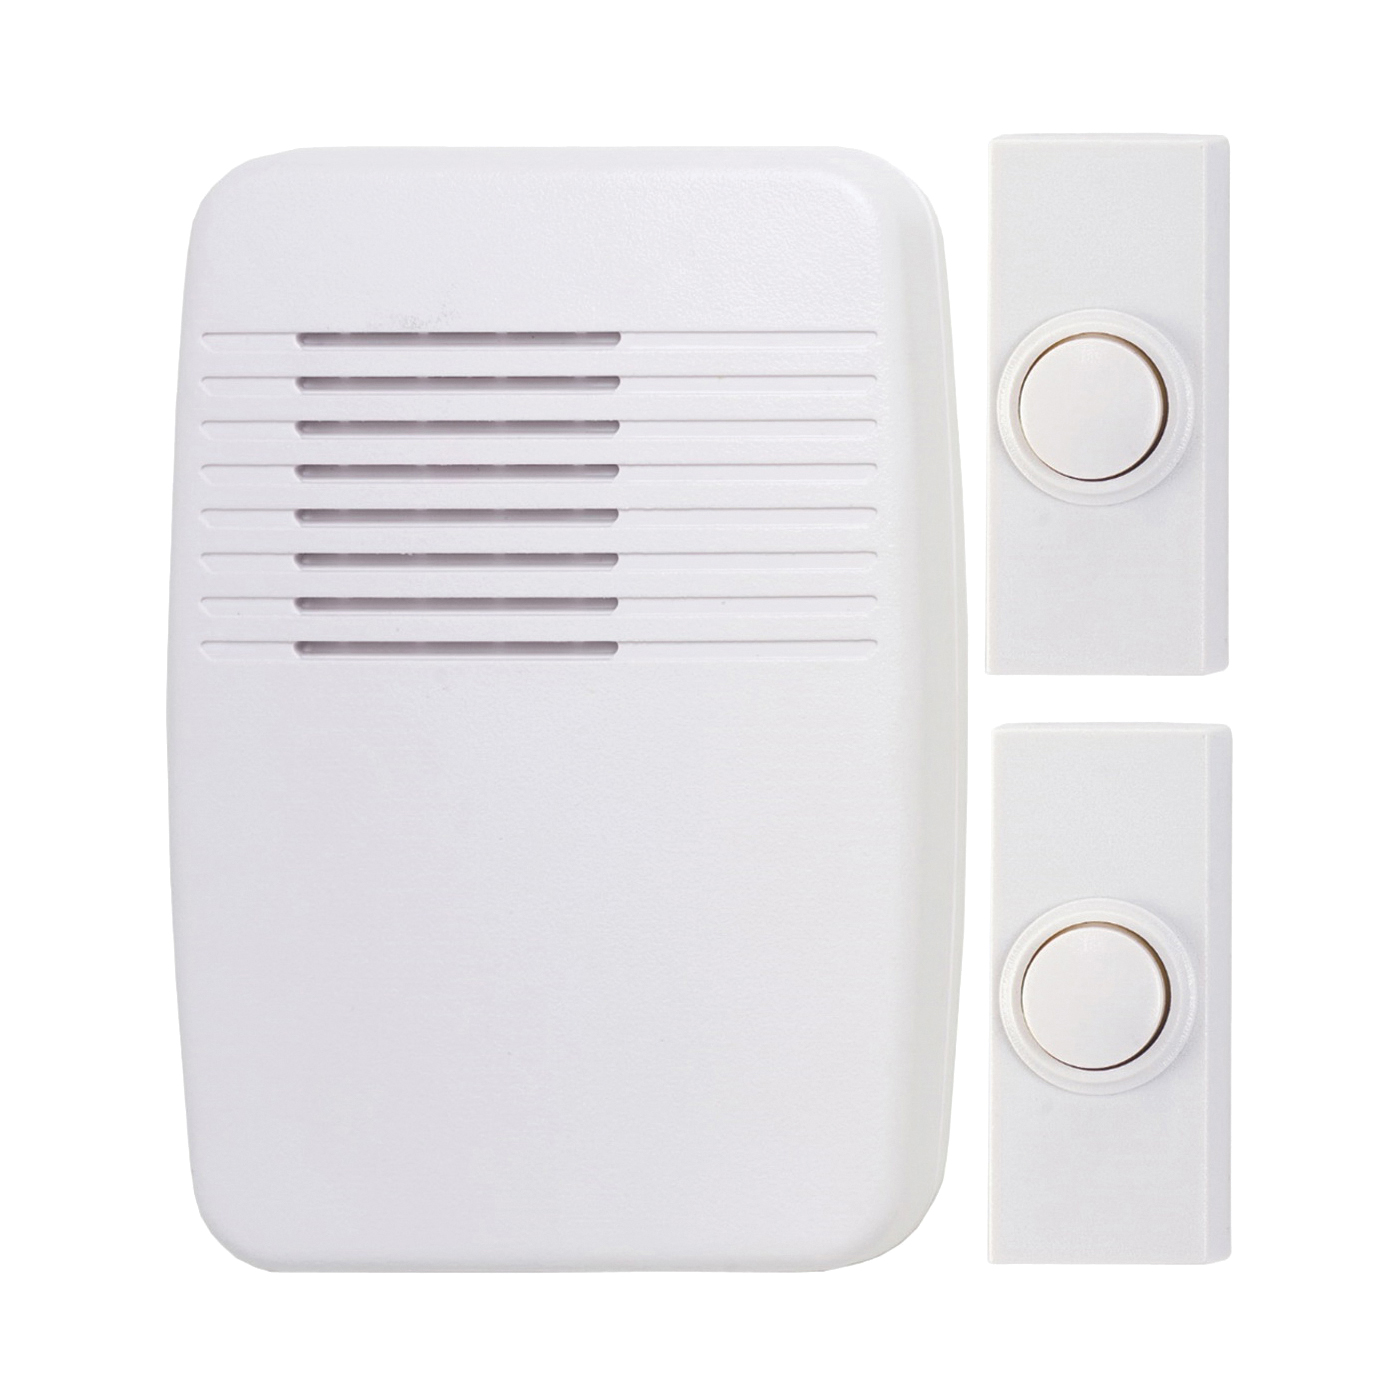 Heath Zenith SL-7367-02 Doorbell Kit, Ding, Ding-Dong, Westminster Tone, 75 dB, White - 1